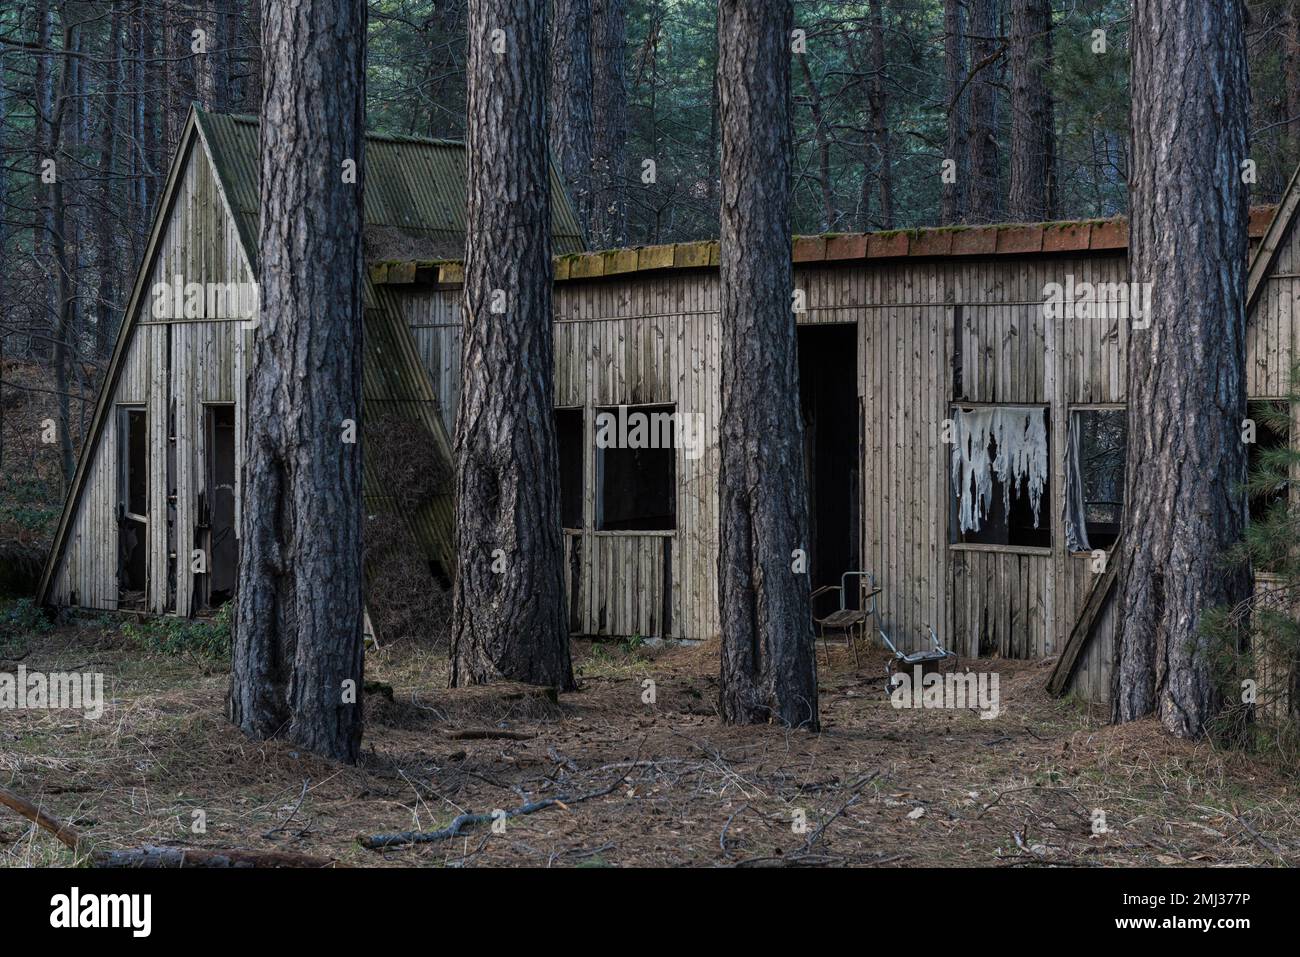 An empty and derelict hut in an old abandoned ski resort in the woods on Mount Etna, Sicily, Italy Stock Photo